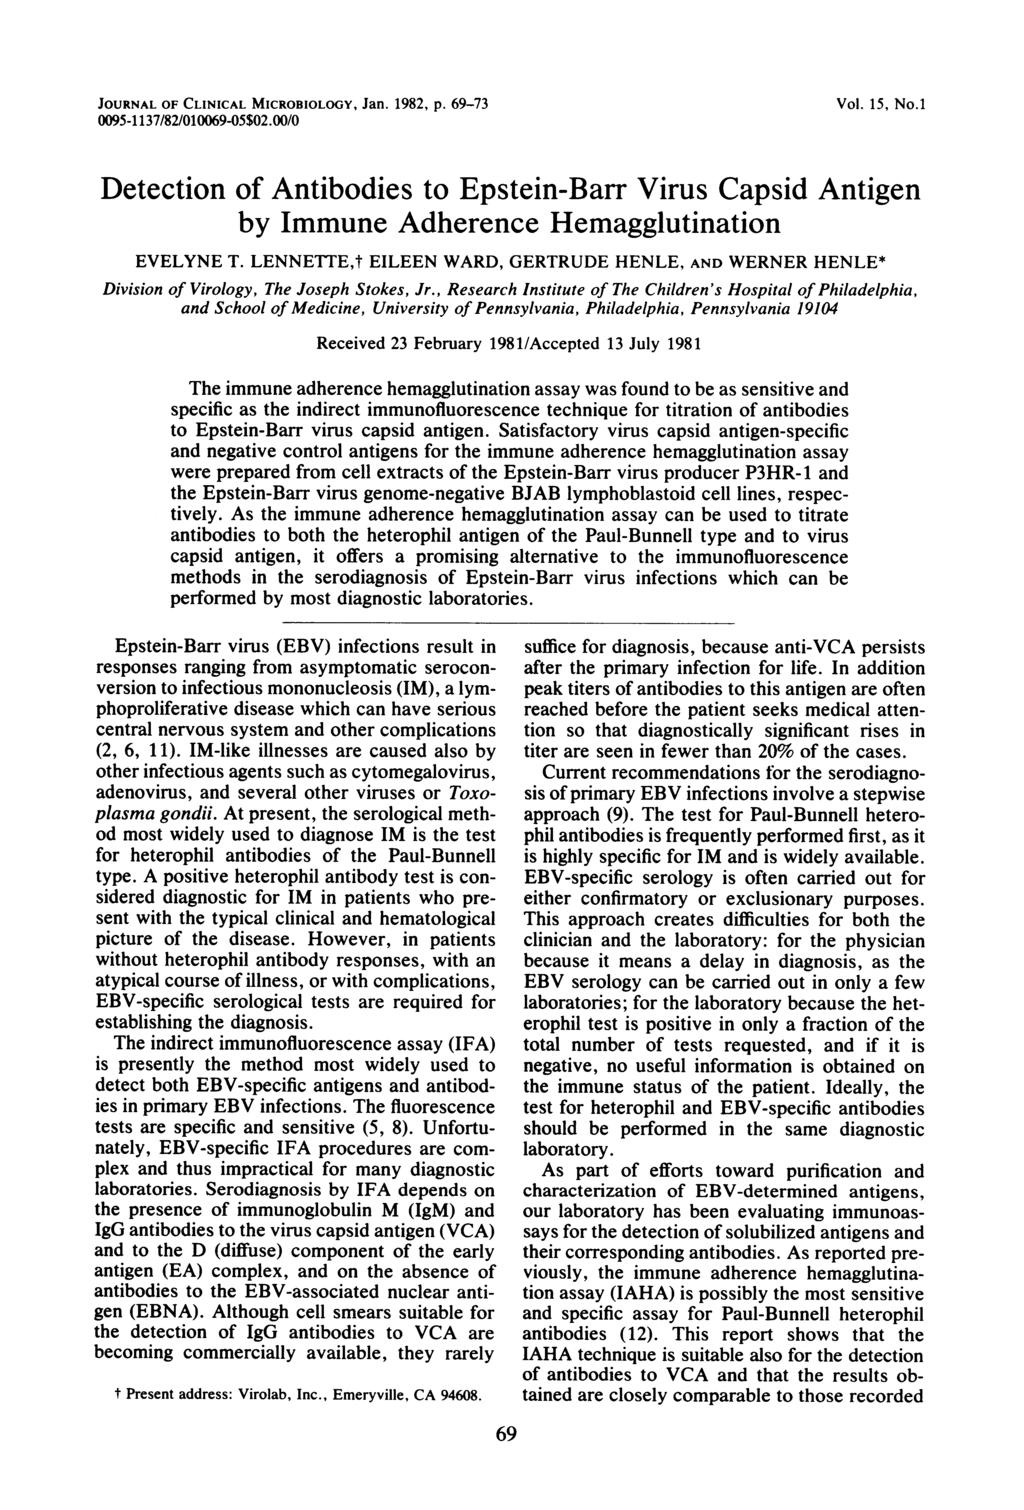 JOURNAL OF CLINICAL MICROBIOLOGY, Jan. 1982, p. 69-73 95-1137/82/169-5$2./ Vol. 15, No.1 Detection of Antibodies to Epstein-Barr Virus Capsid Antigen by Immune Adherence Hemagglutination EVELYNE T.